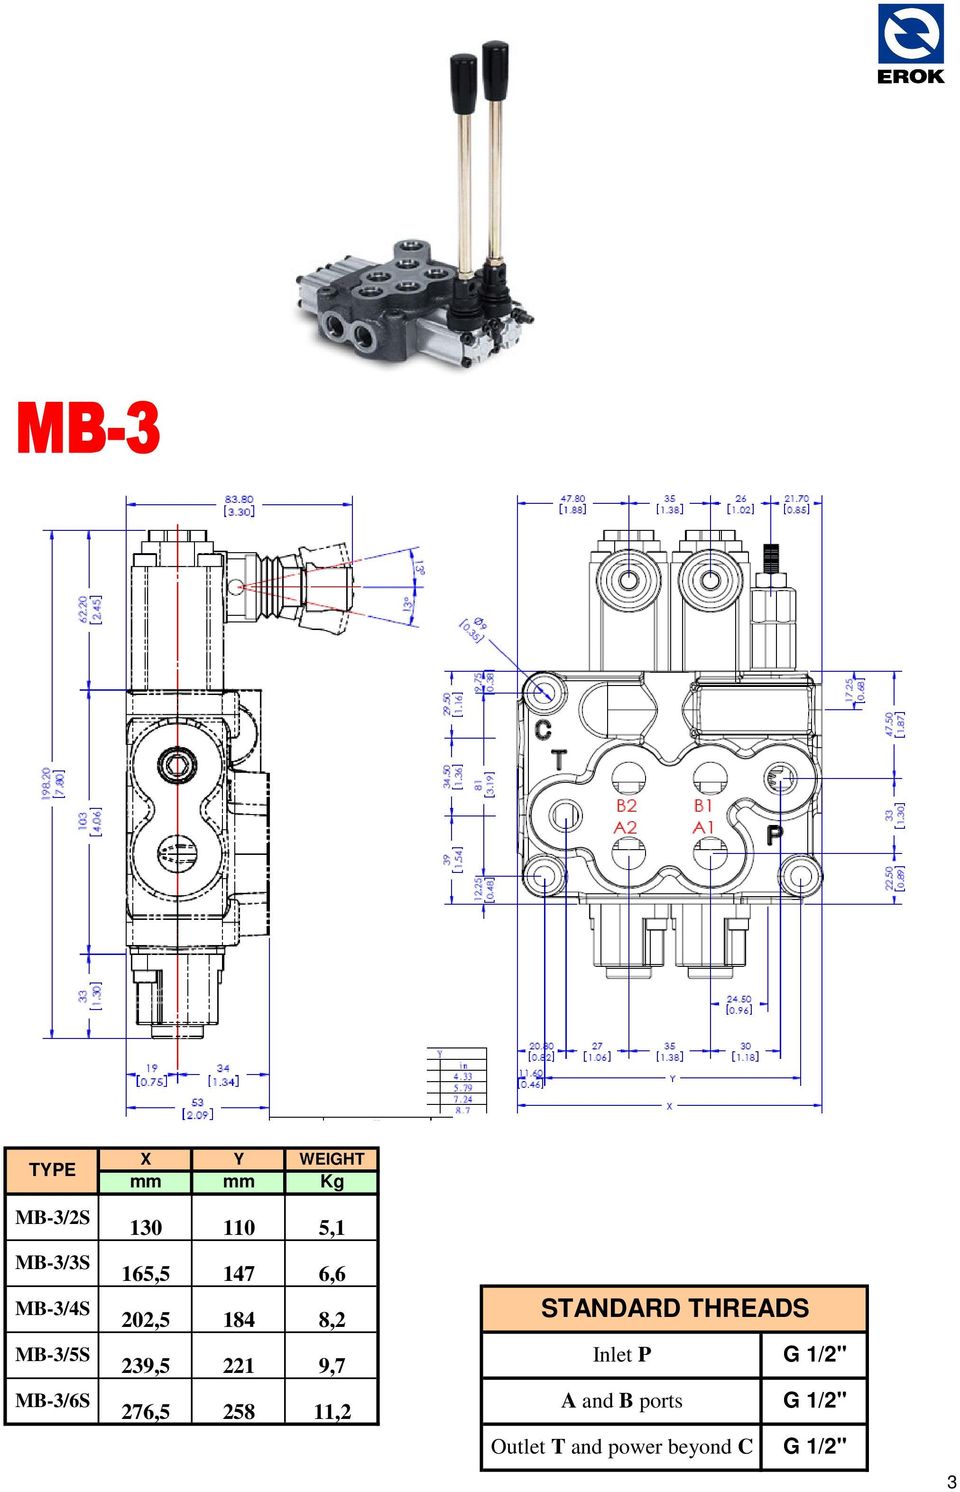 MB-3/5S 239,5 221 9,7 Inlet P G 1/2" MB-3/6S 276,5 258